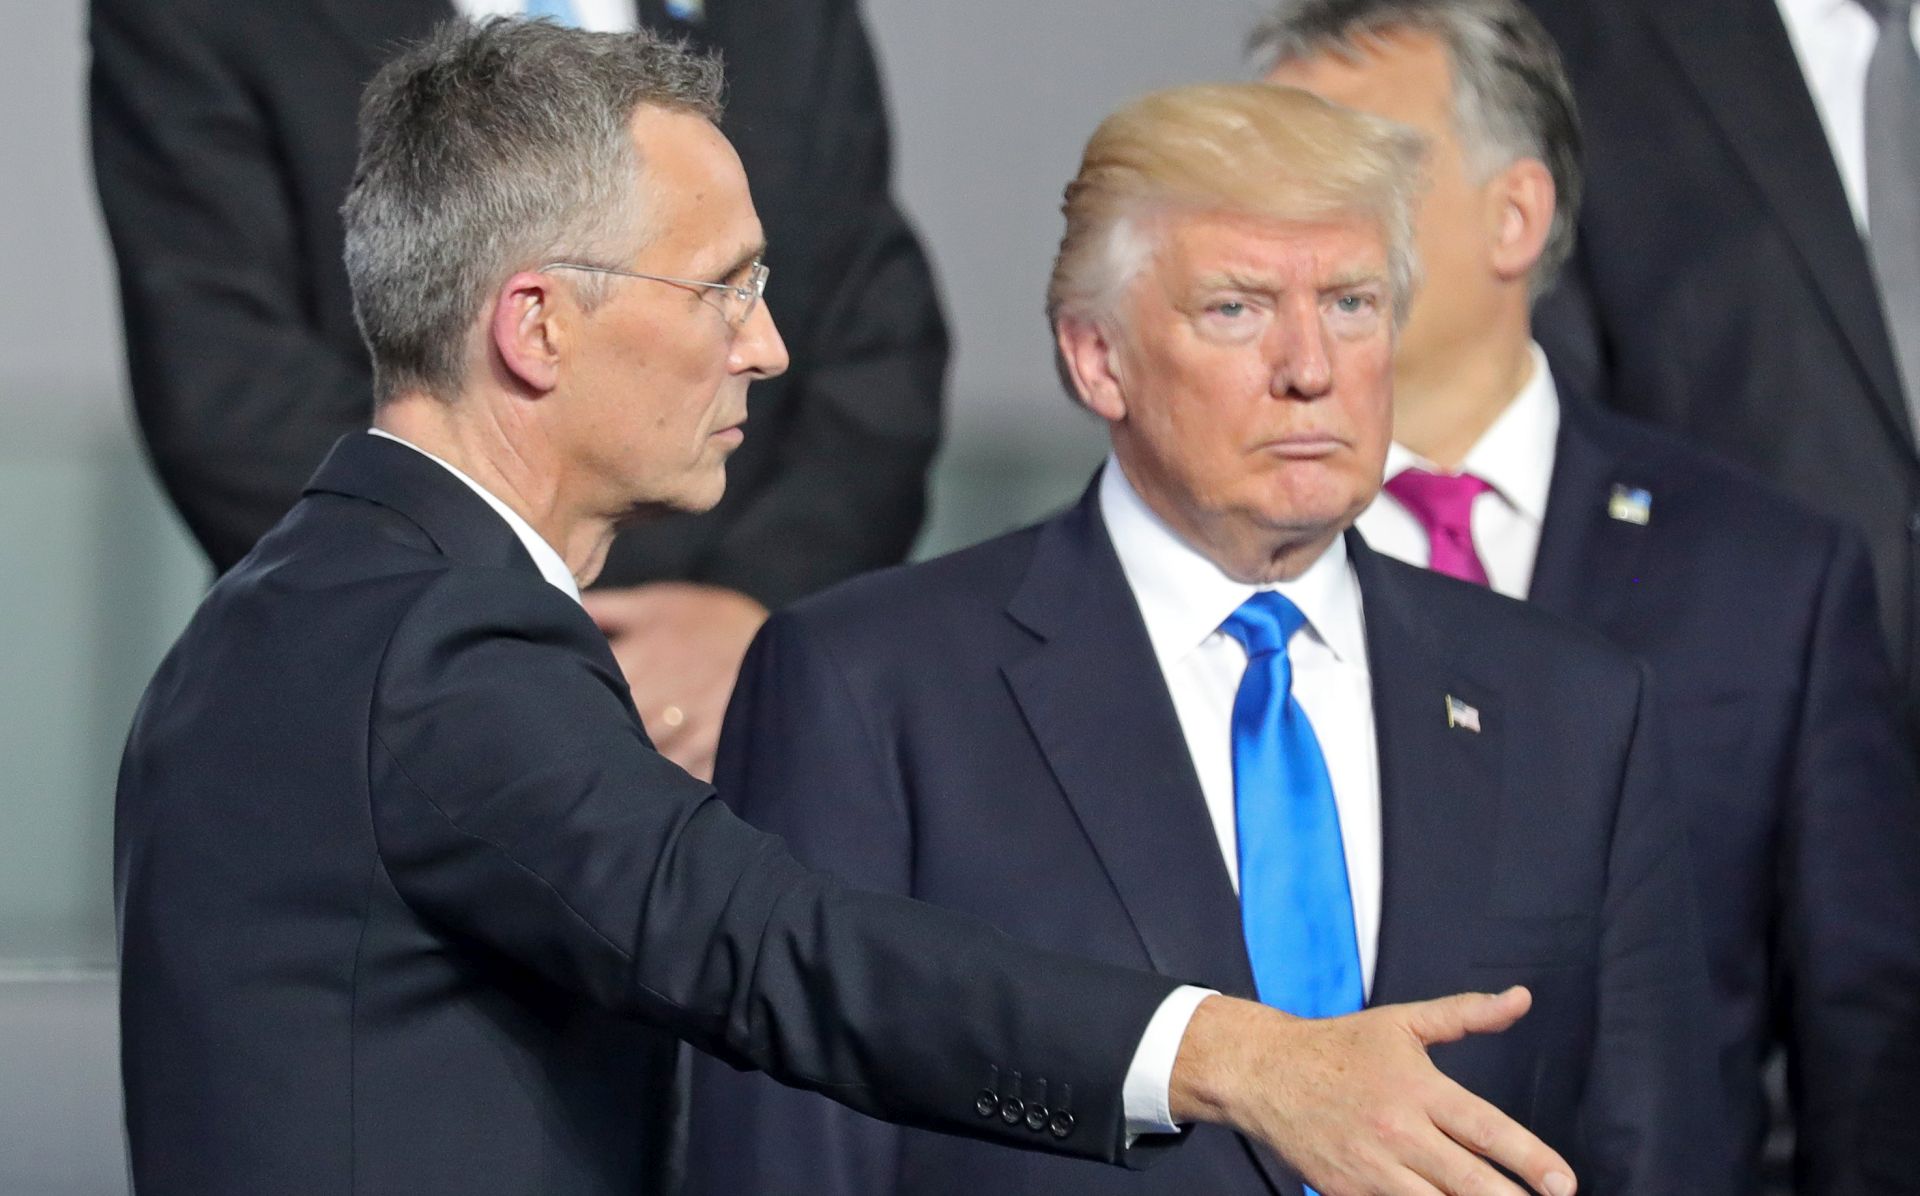 epa05989435 NATO Secretary General Jens Stoltenberg (L) and US President Donald J. Trump (R) arrive as they line up for the group photo at the NATO summit in Brussels, Belgium, 25 May 2017. NATO countries' heads of states and governments gather in Brussels for a one-day meeting.  EPA/ARMANDO BABANI